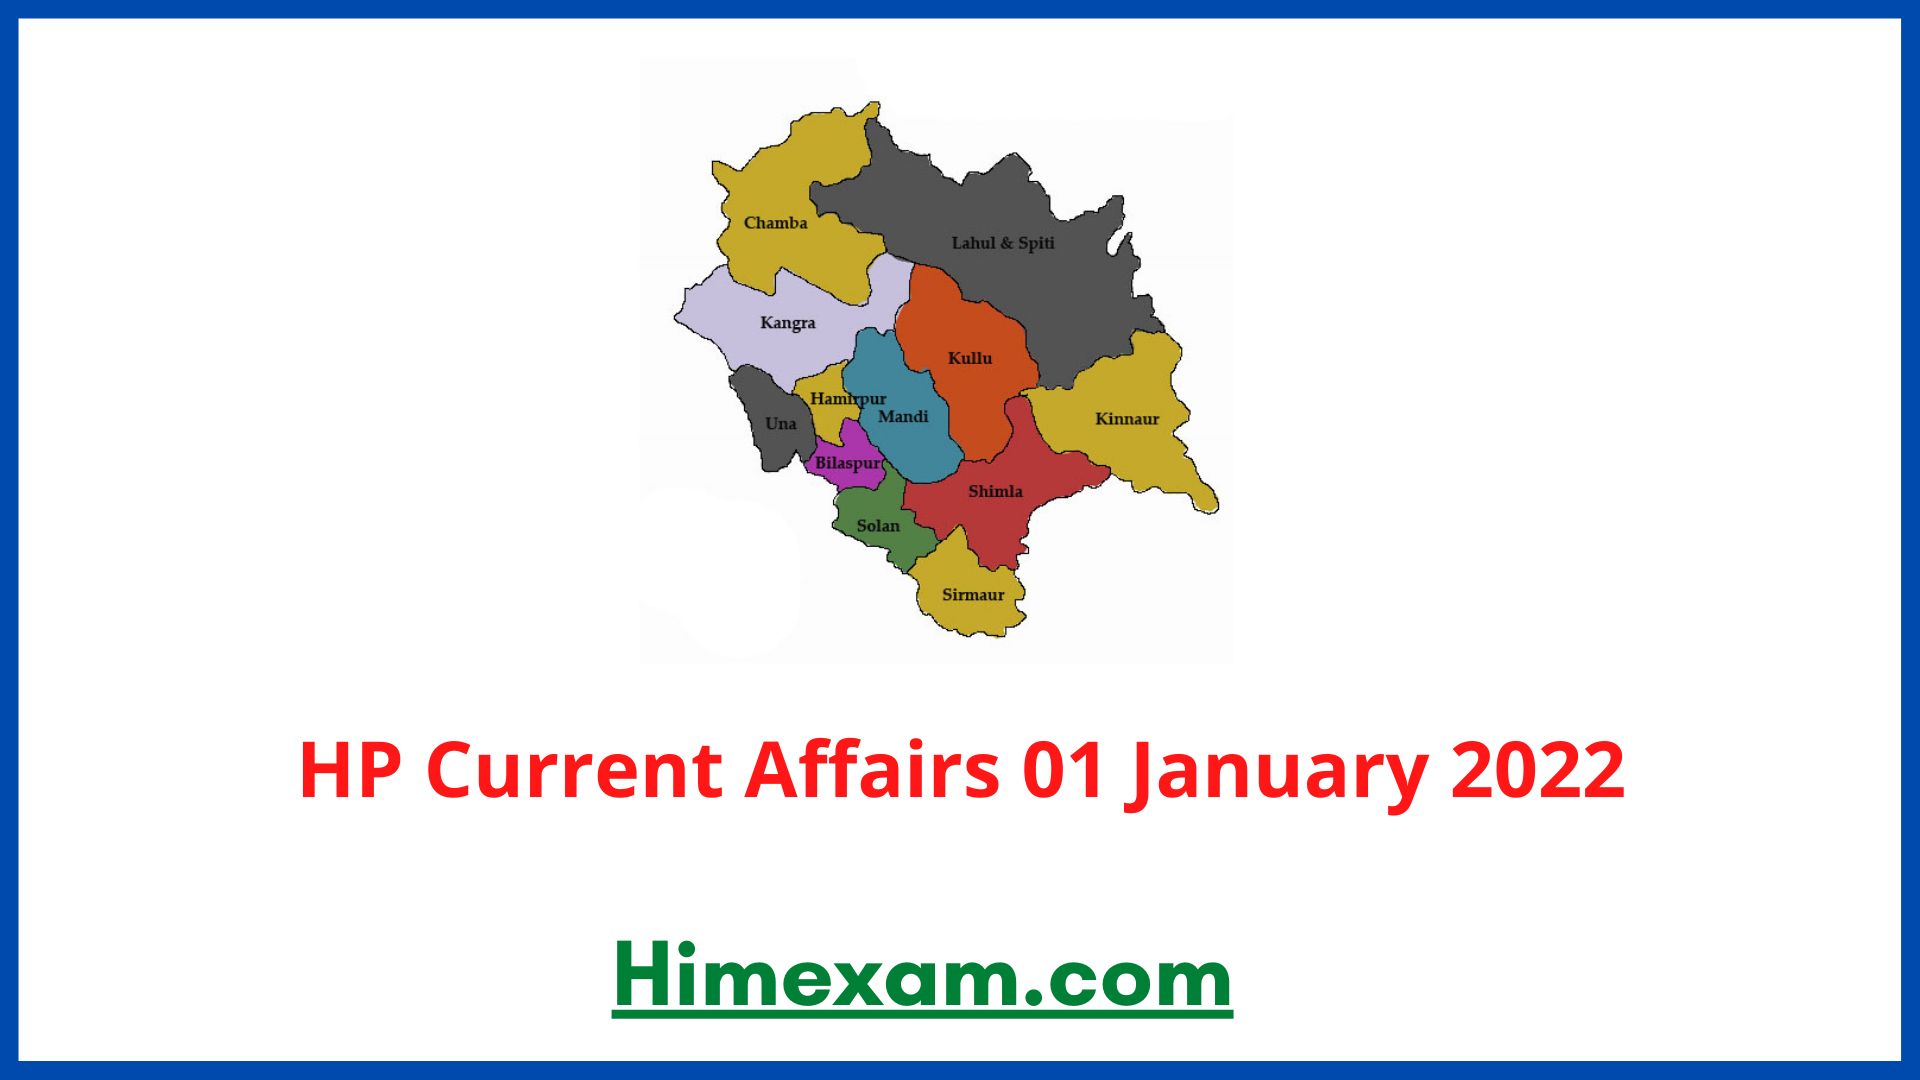 HP Current Affairs 01 January 2022